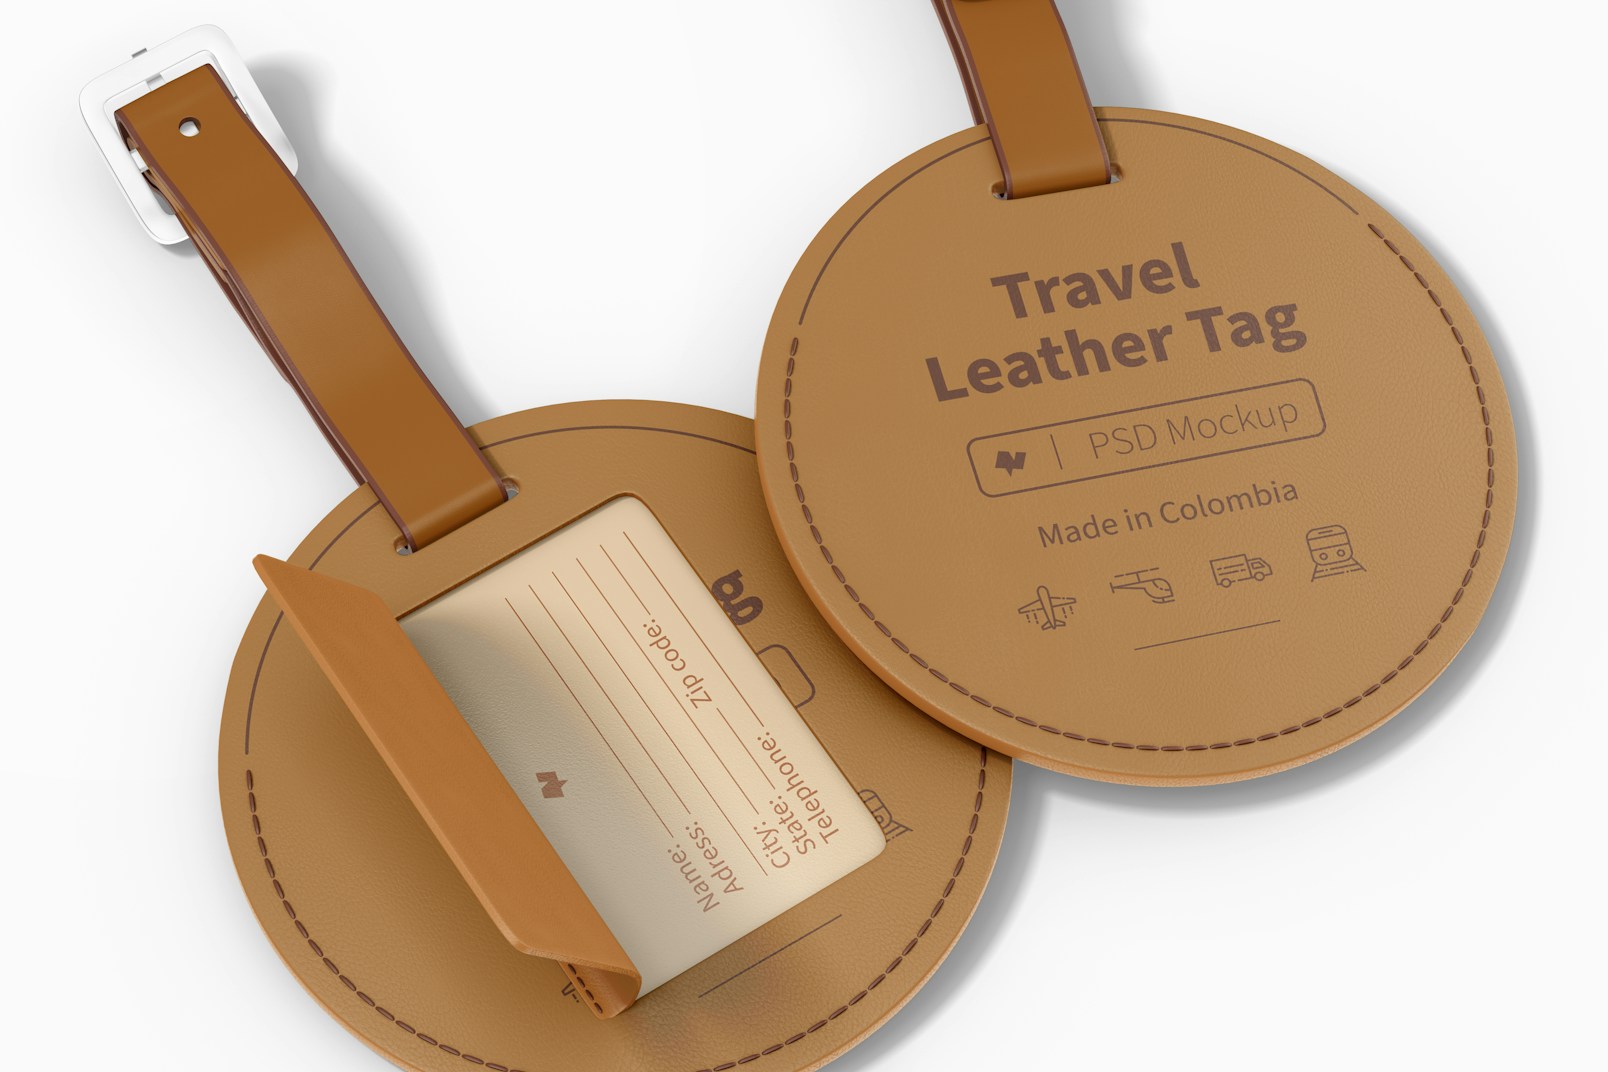 Round Travel Leather Tags Mockup, Close Up